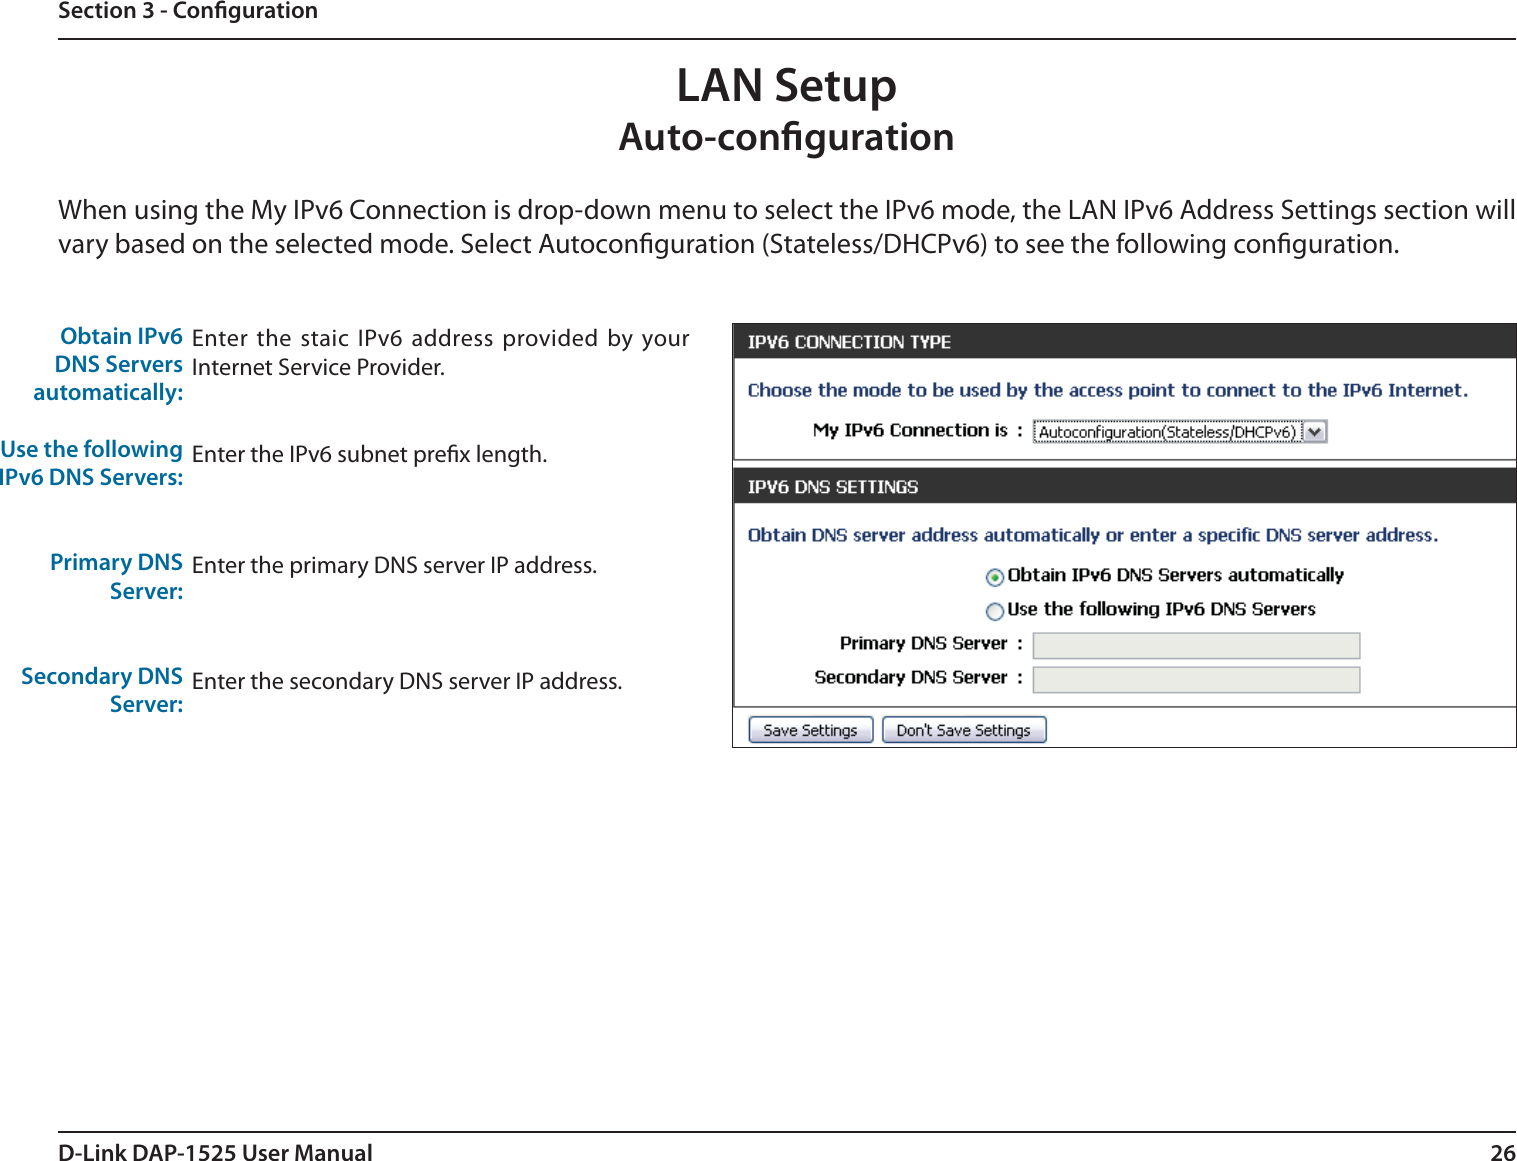 26D-Link DAP-1525 User ManualSection 3 - CongurationLAN SetupAuto-congurationWhen using the My IPv6 Connection is drop-down menu to select the IPv6 mode, the LAN IPv6 Address Settings section will vary based on the selected mode. Select Autoconguration (Stateless/DHCPv6) to see the following conguration.Obtain IPv6DNS Serversautomatically:Use the followingIPv6 DNS Servers:Primary DNS Server:Secondary DNSServer:Enter the staic IPv6 address provided by your Internet Service Provider.Enter the IPv6 subnet prex length.Enter the primary DNS server IP address.Enter the secondary DNS server IP address.